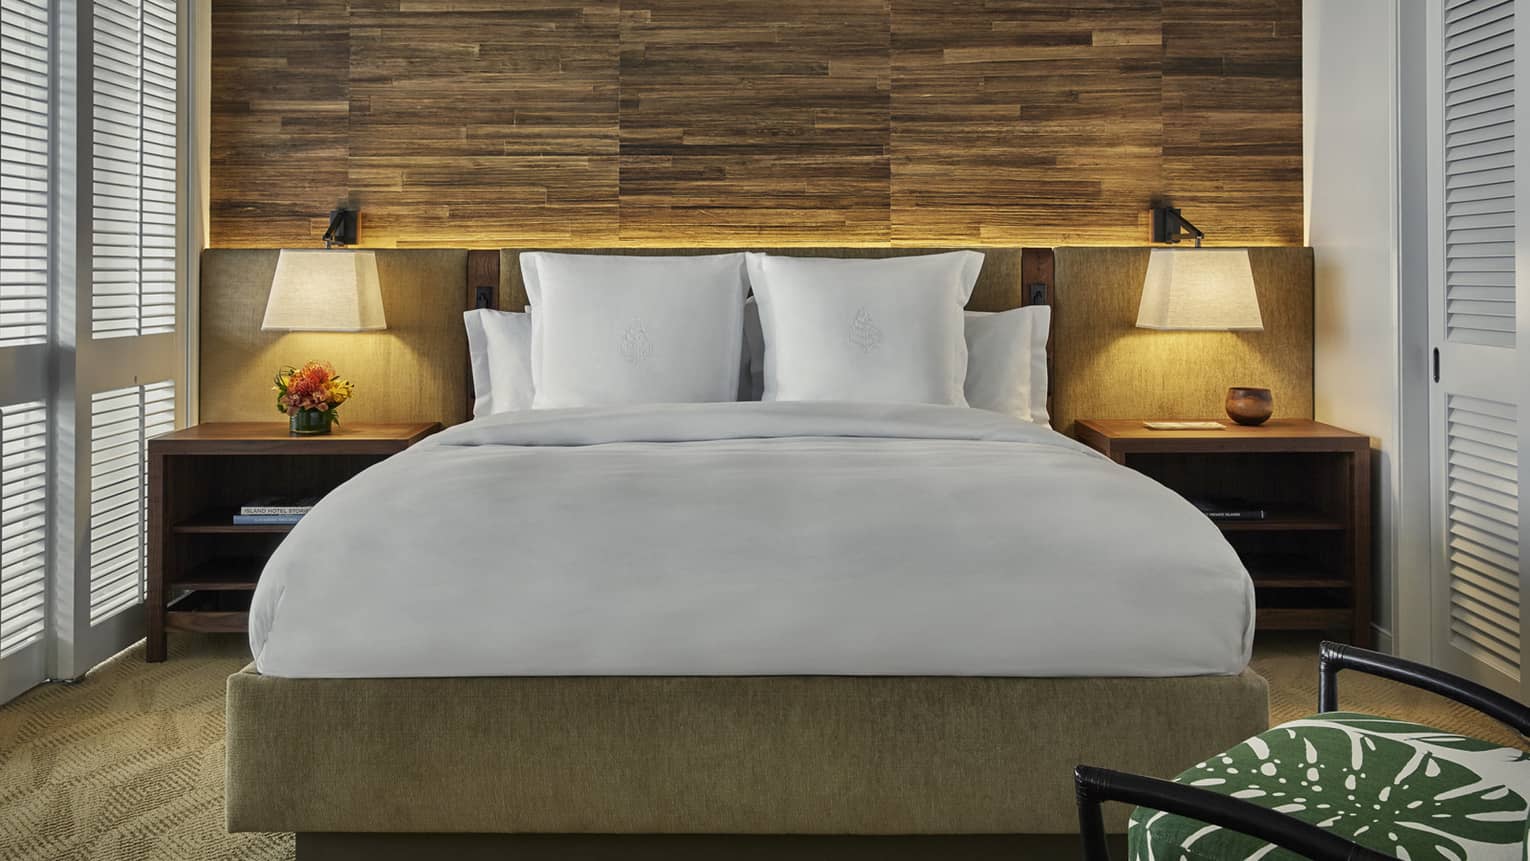 Bed with retro-style wood and upholstered headboard, nightstands, lamps, rustic wood wall